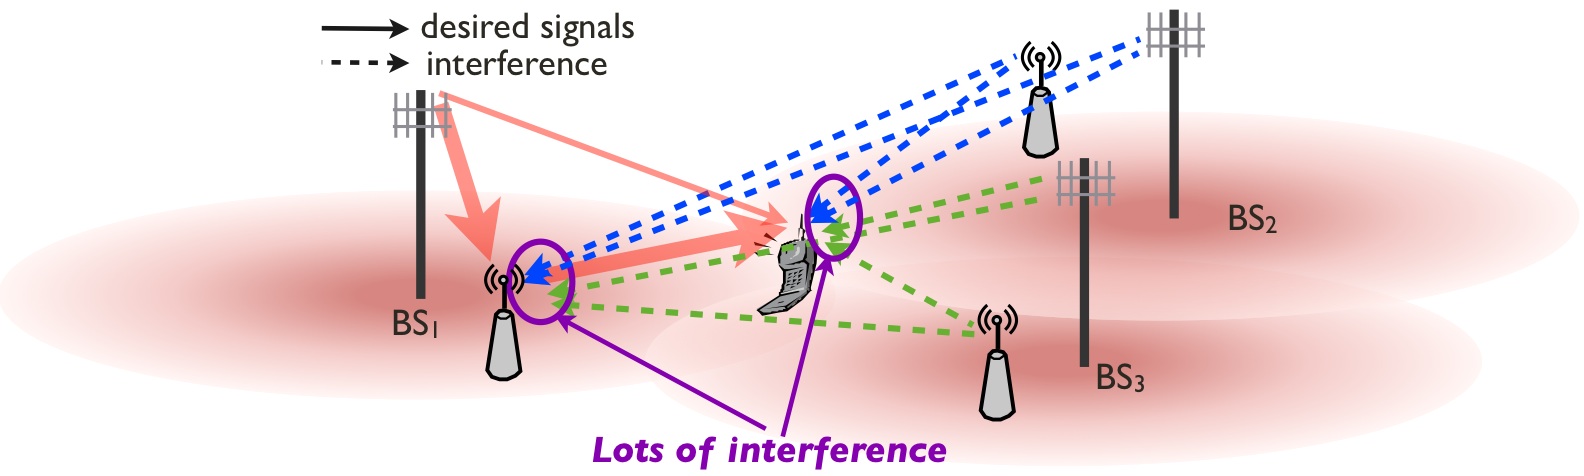 Interference in Wireless Communication Systems